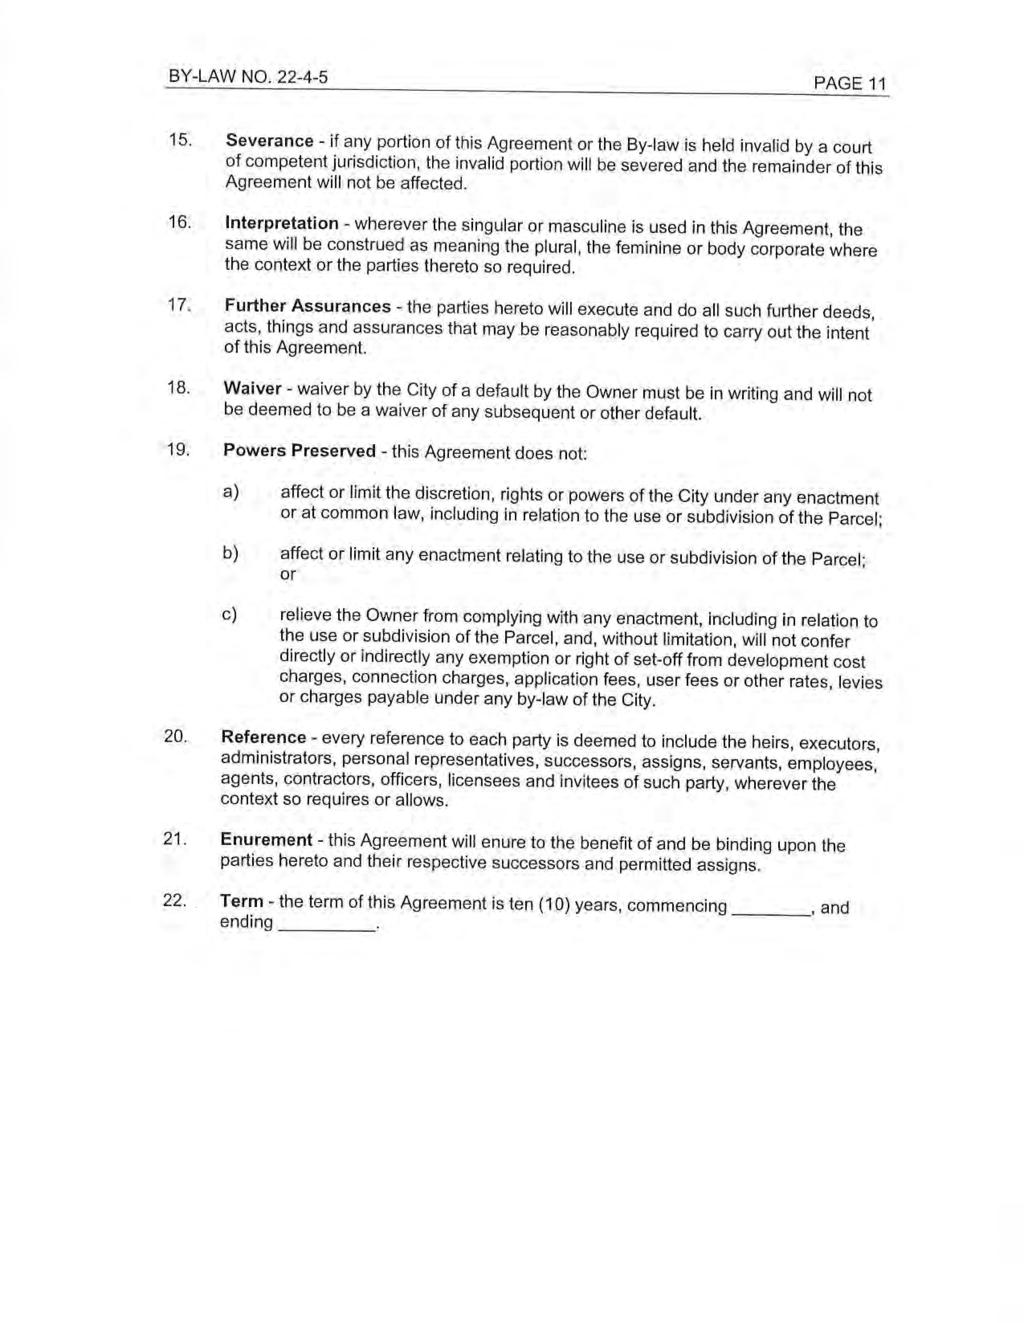 BY-LAW NO. 22-4-5 PAGE 5.